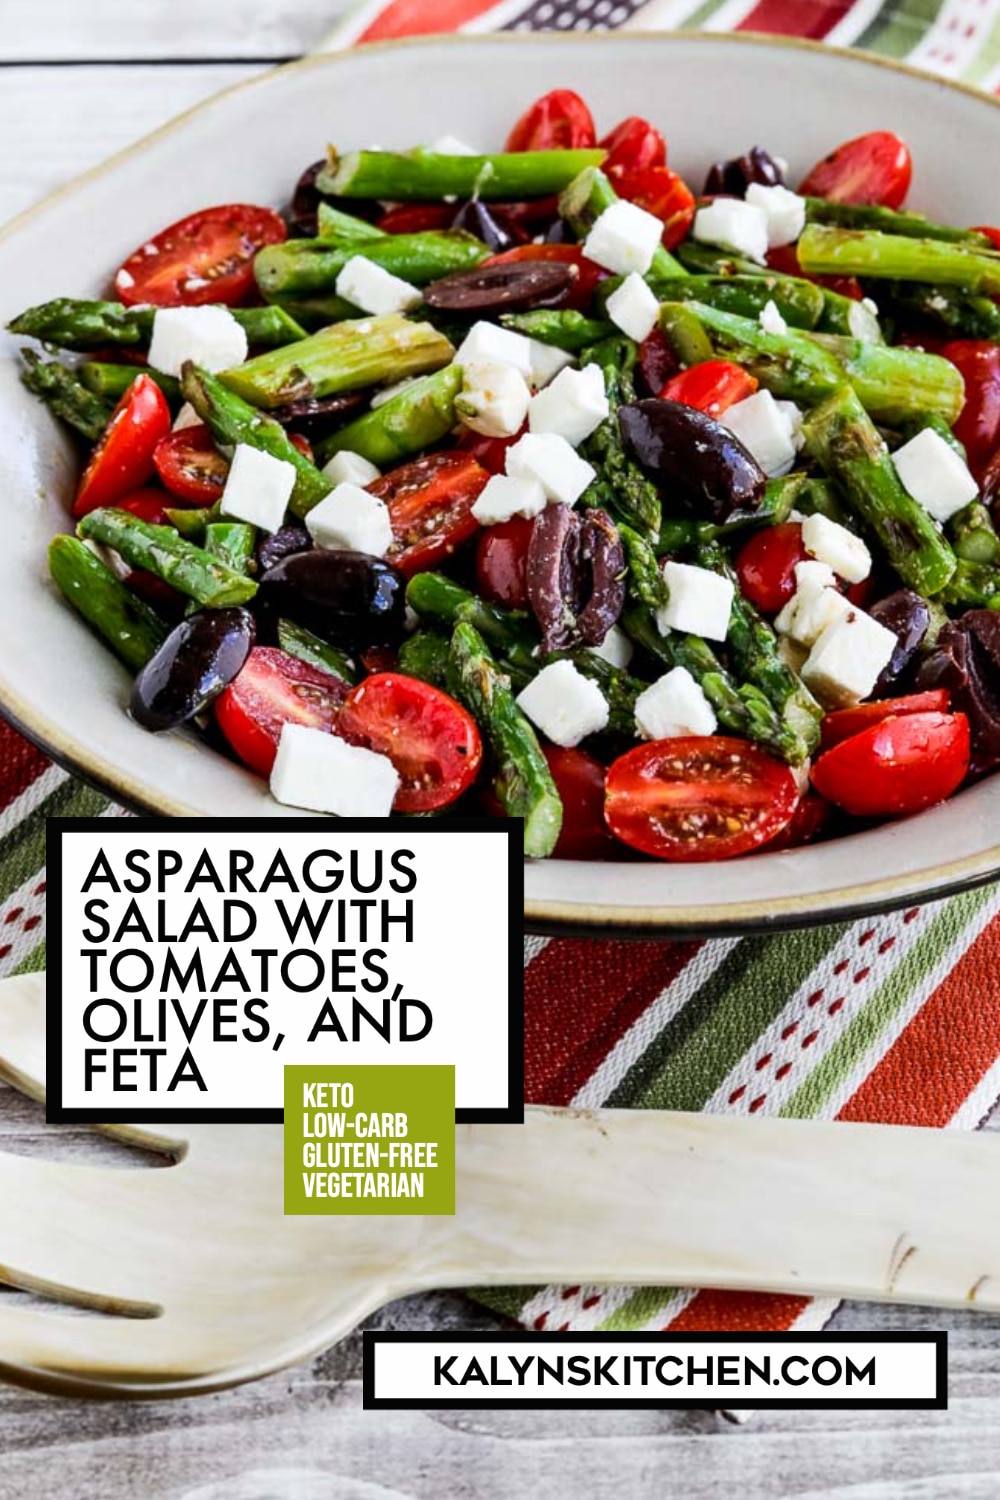 Pinterest image of Asparagus Salad with Tomatoes, Olives, and Feta